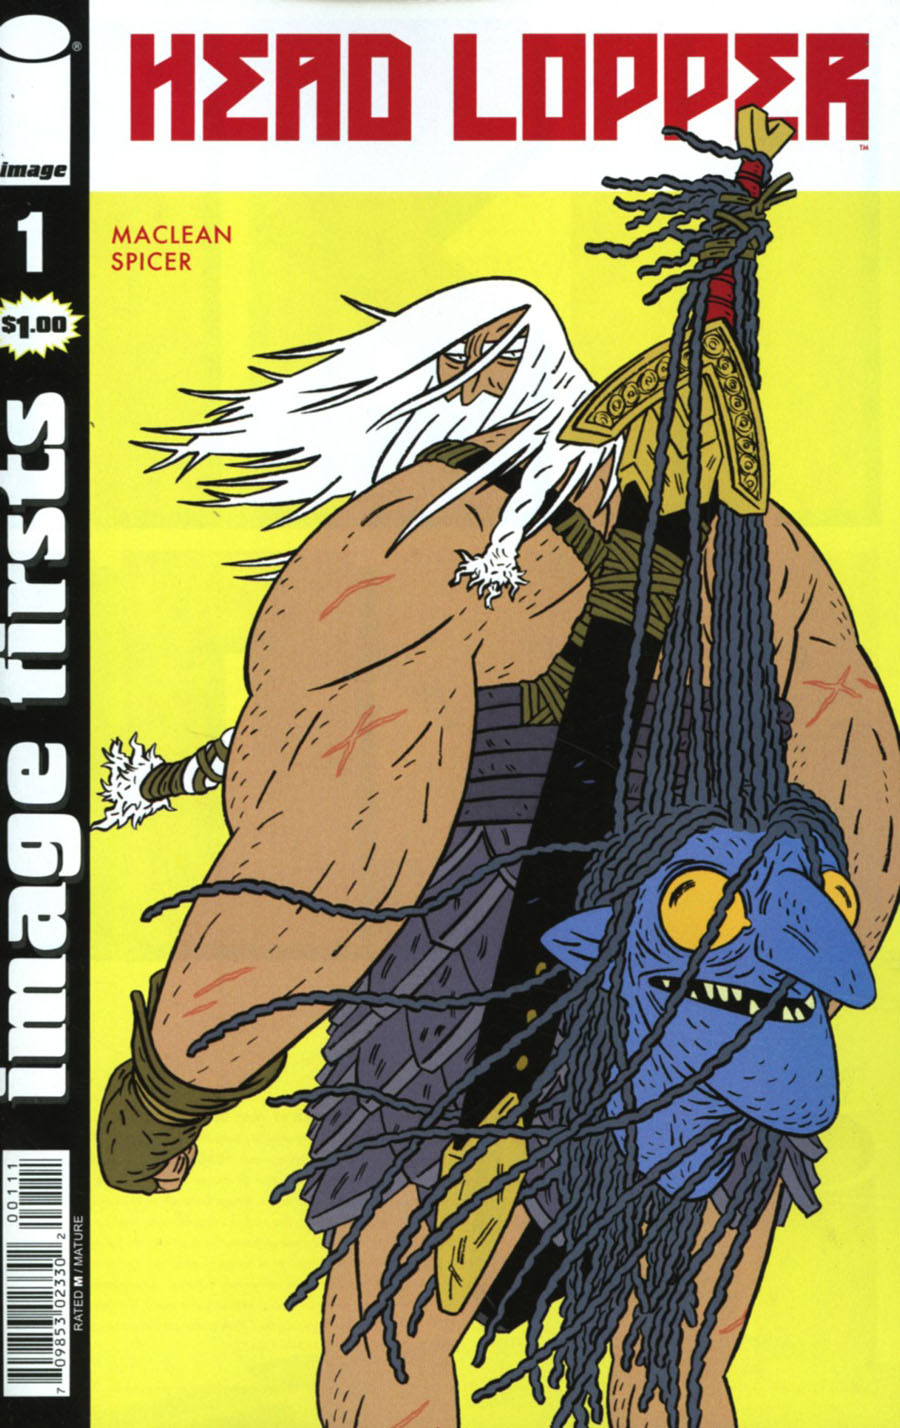 Image Firsts Head Lopper #1 Cover A